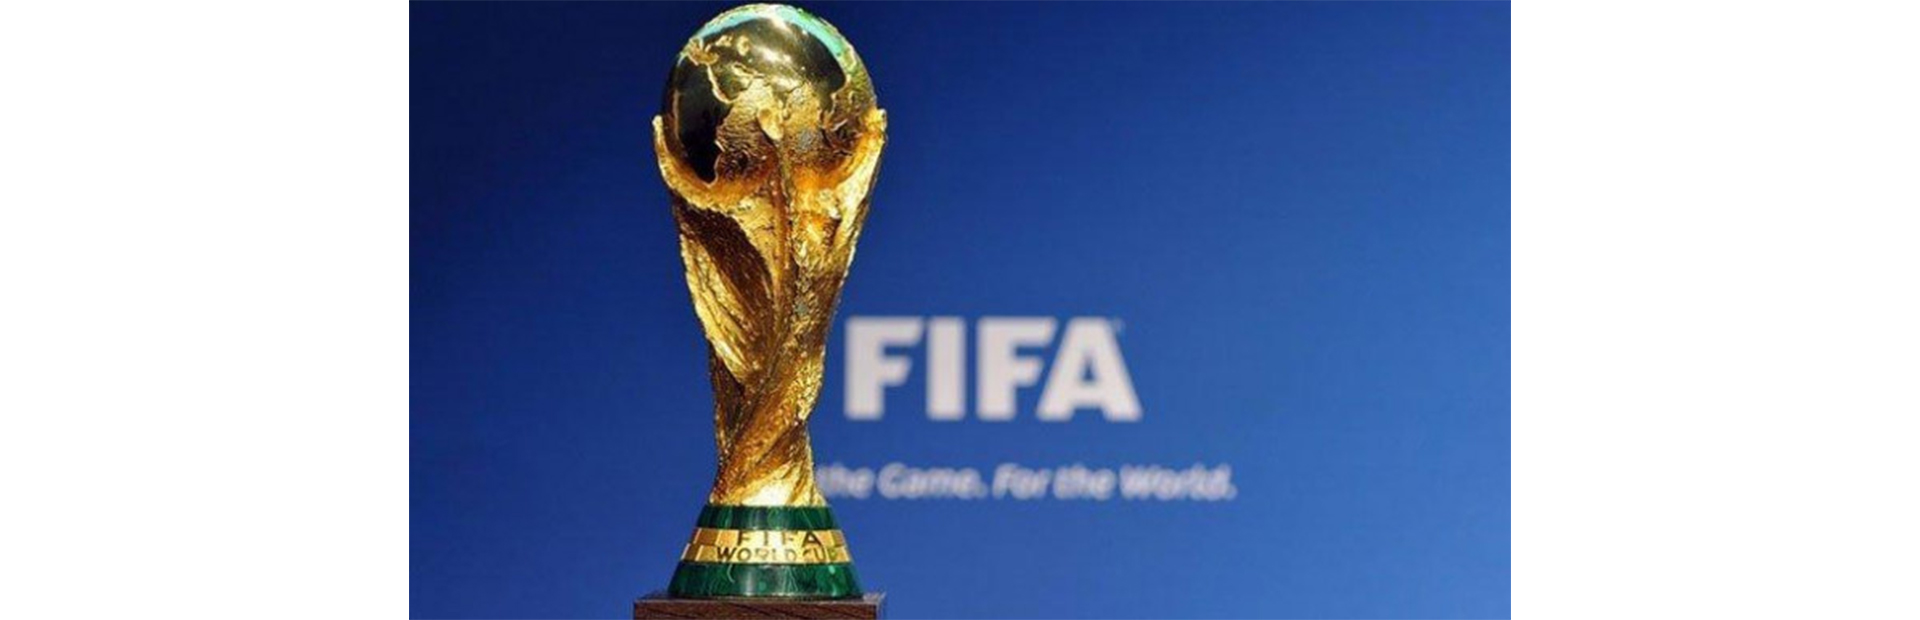 Fifa World Cup trophy arrives in Bangladesh